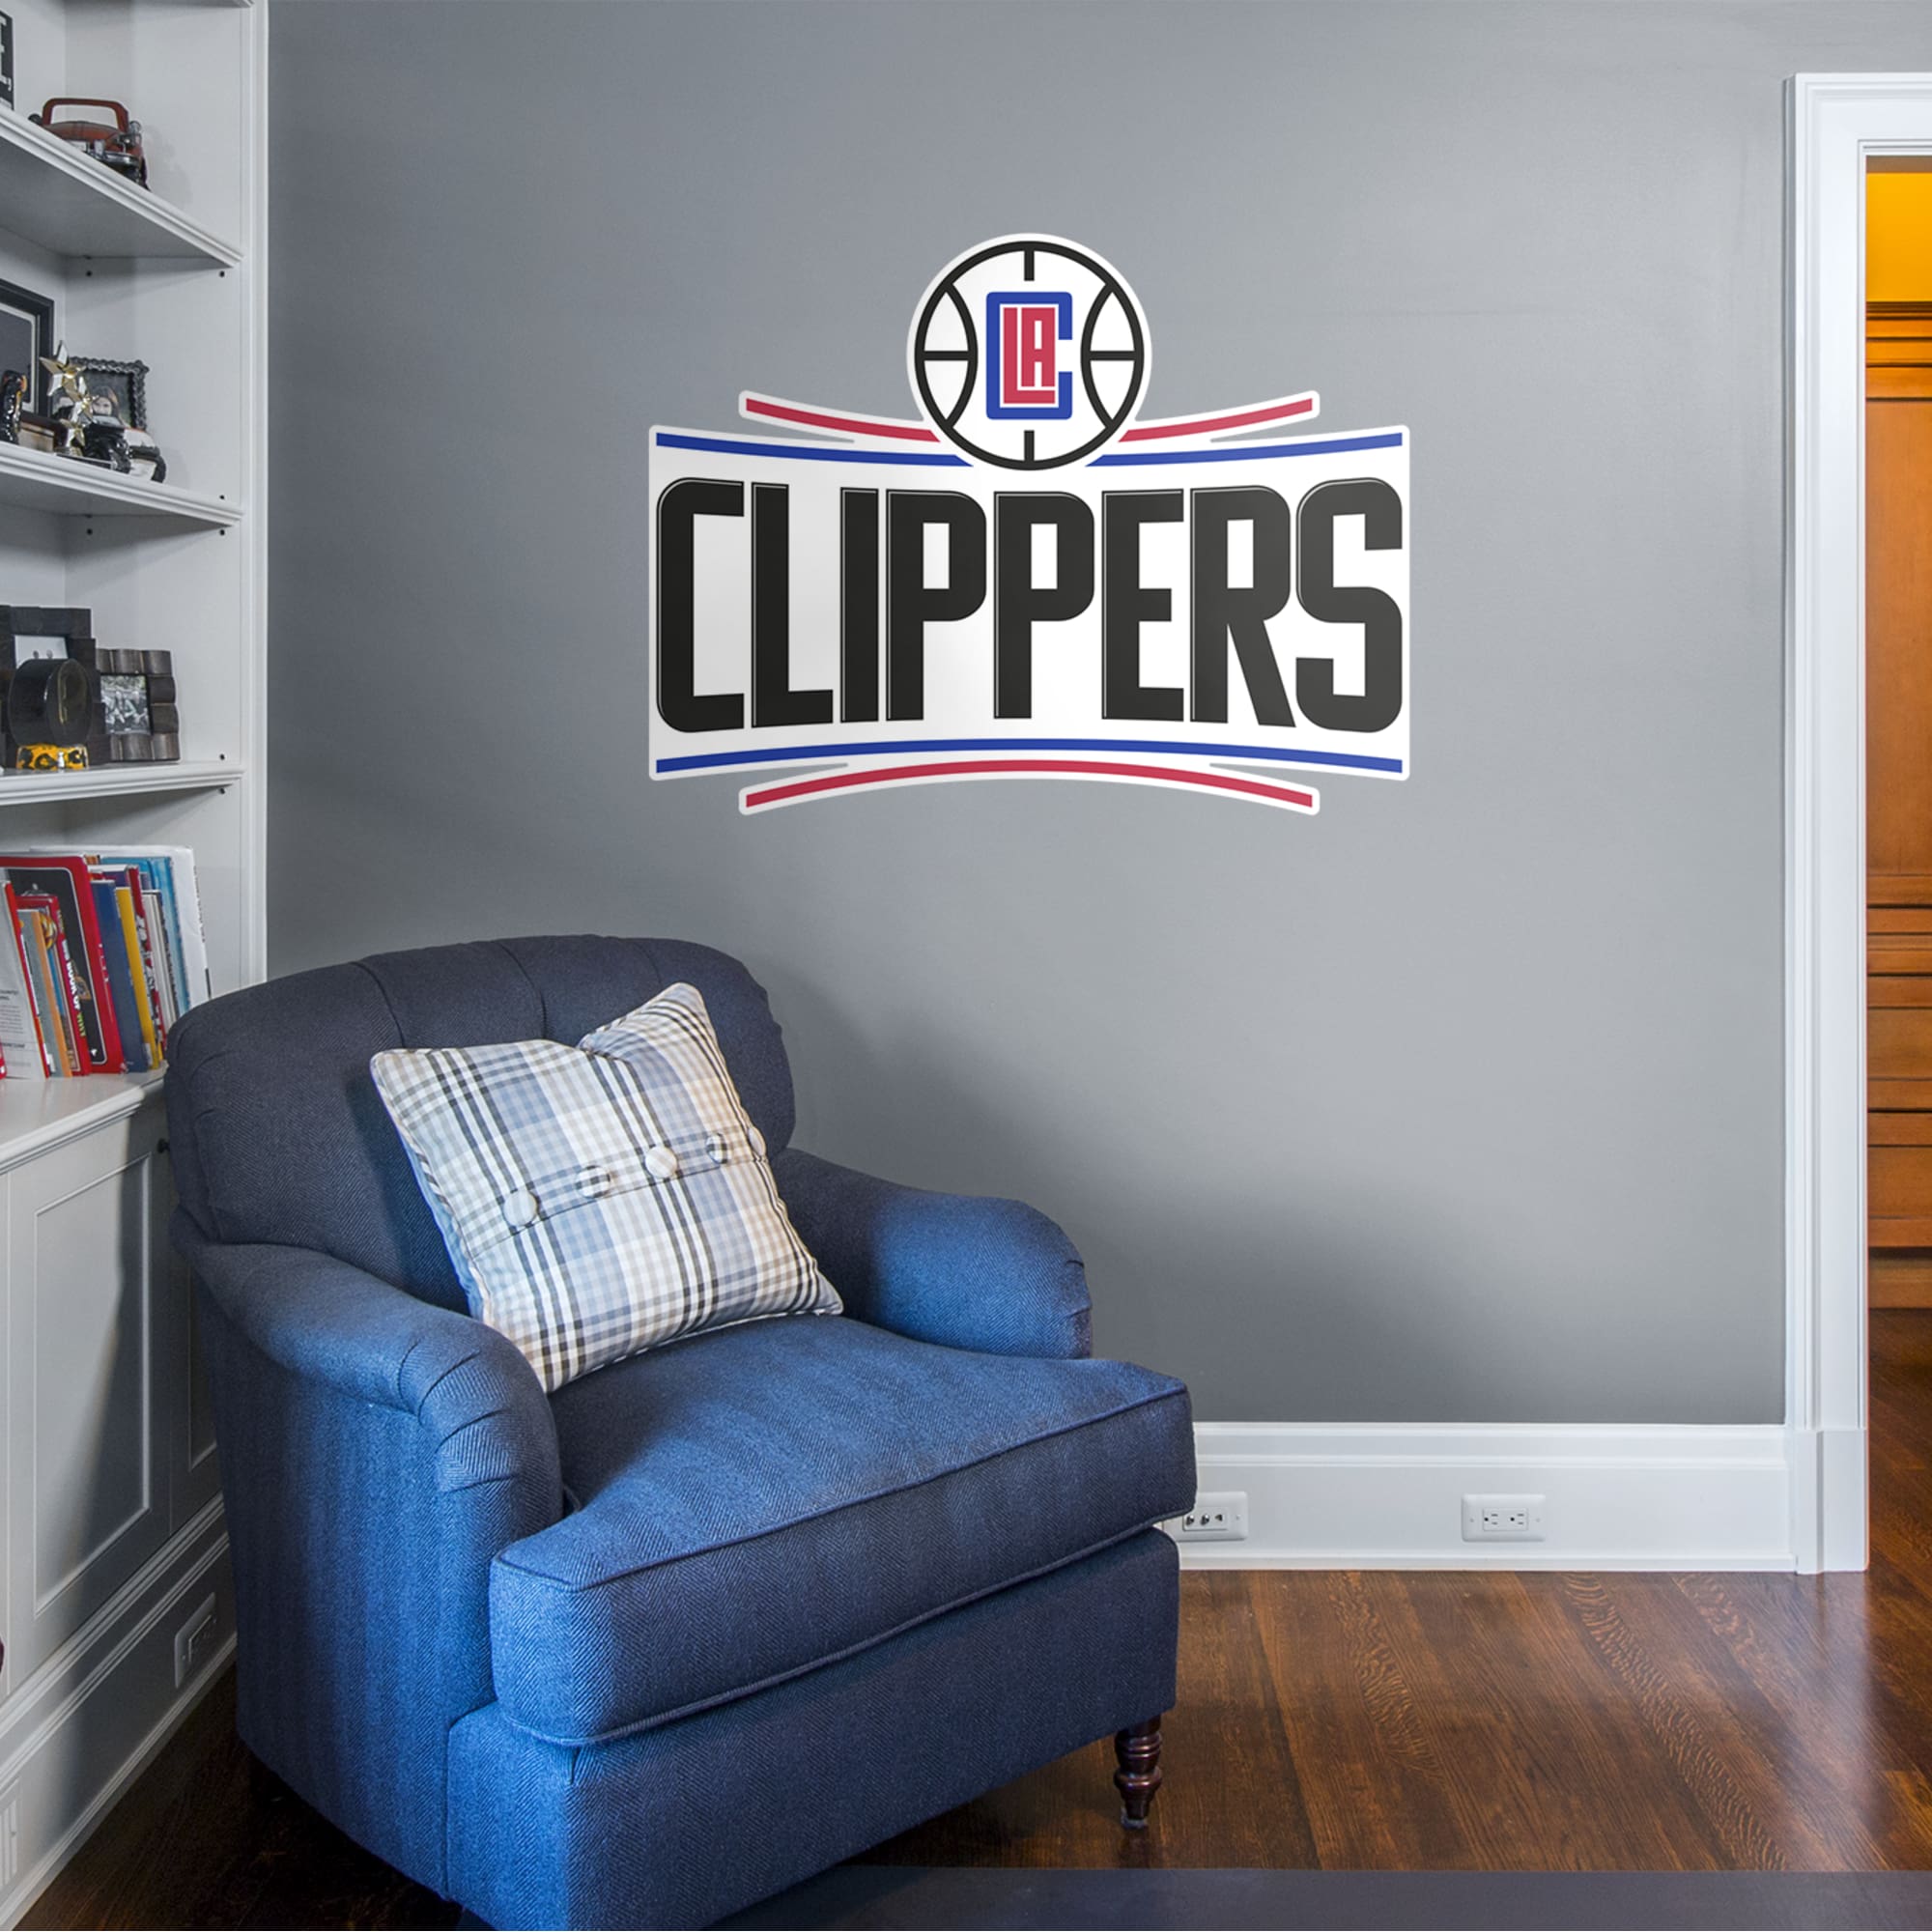 Los Angeles Clippers: Logo - Officially Licensed NBA Removable Wall Decal 44.0"W x 33.0"H by Fathead | Vinyl